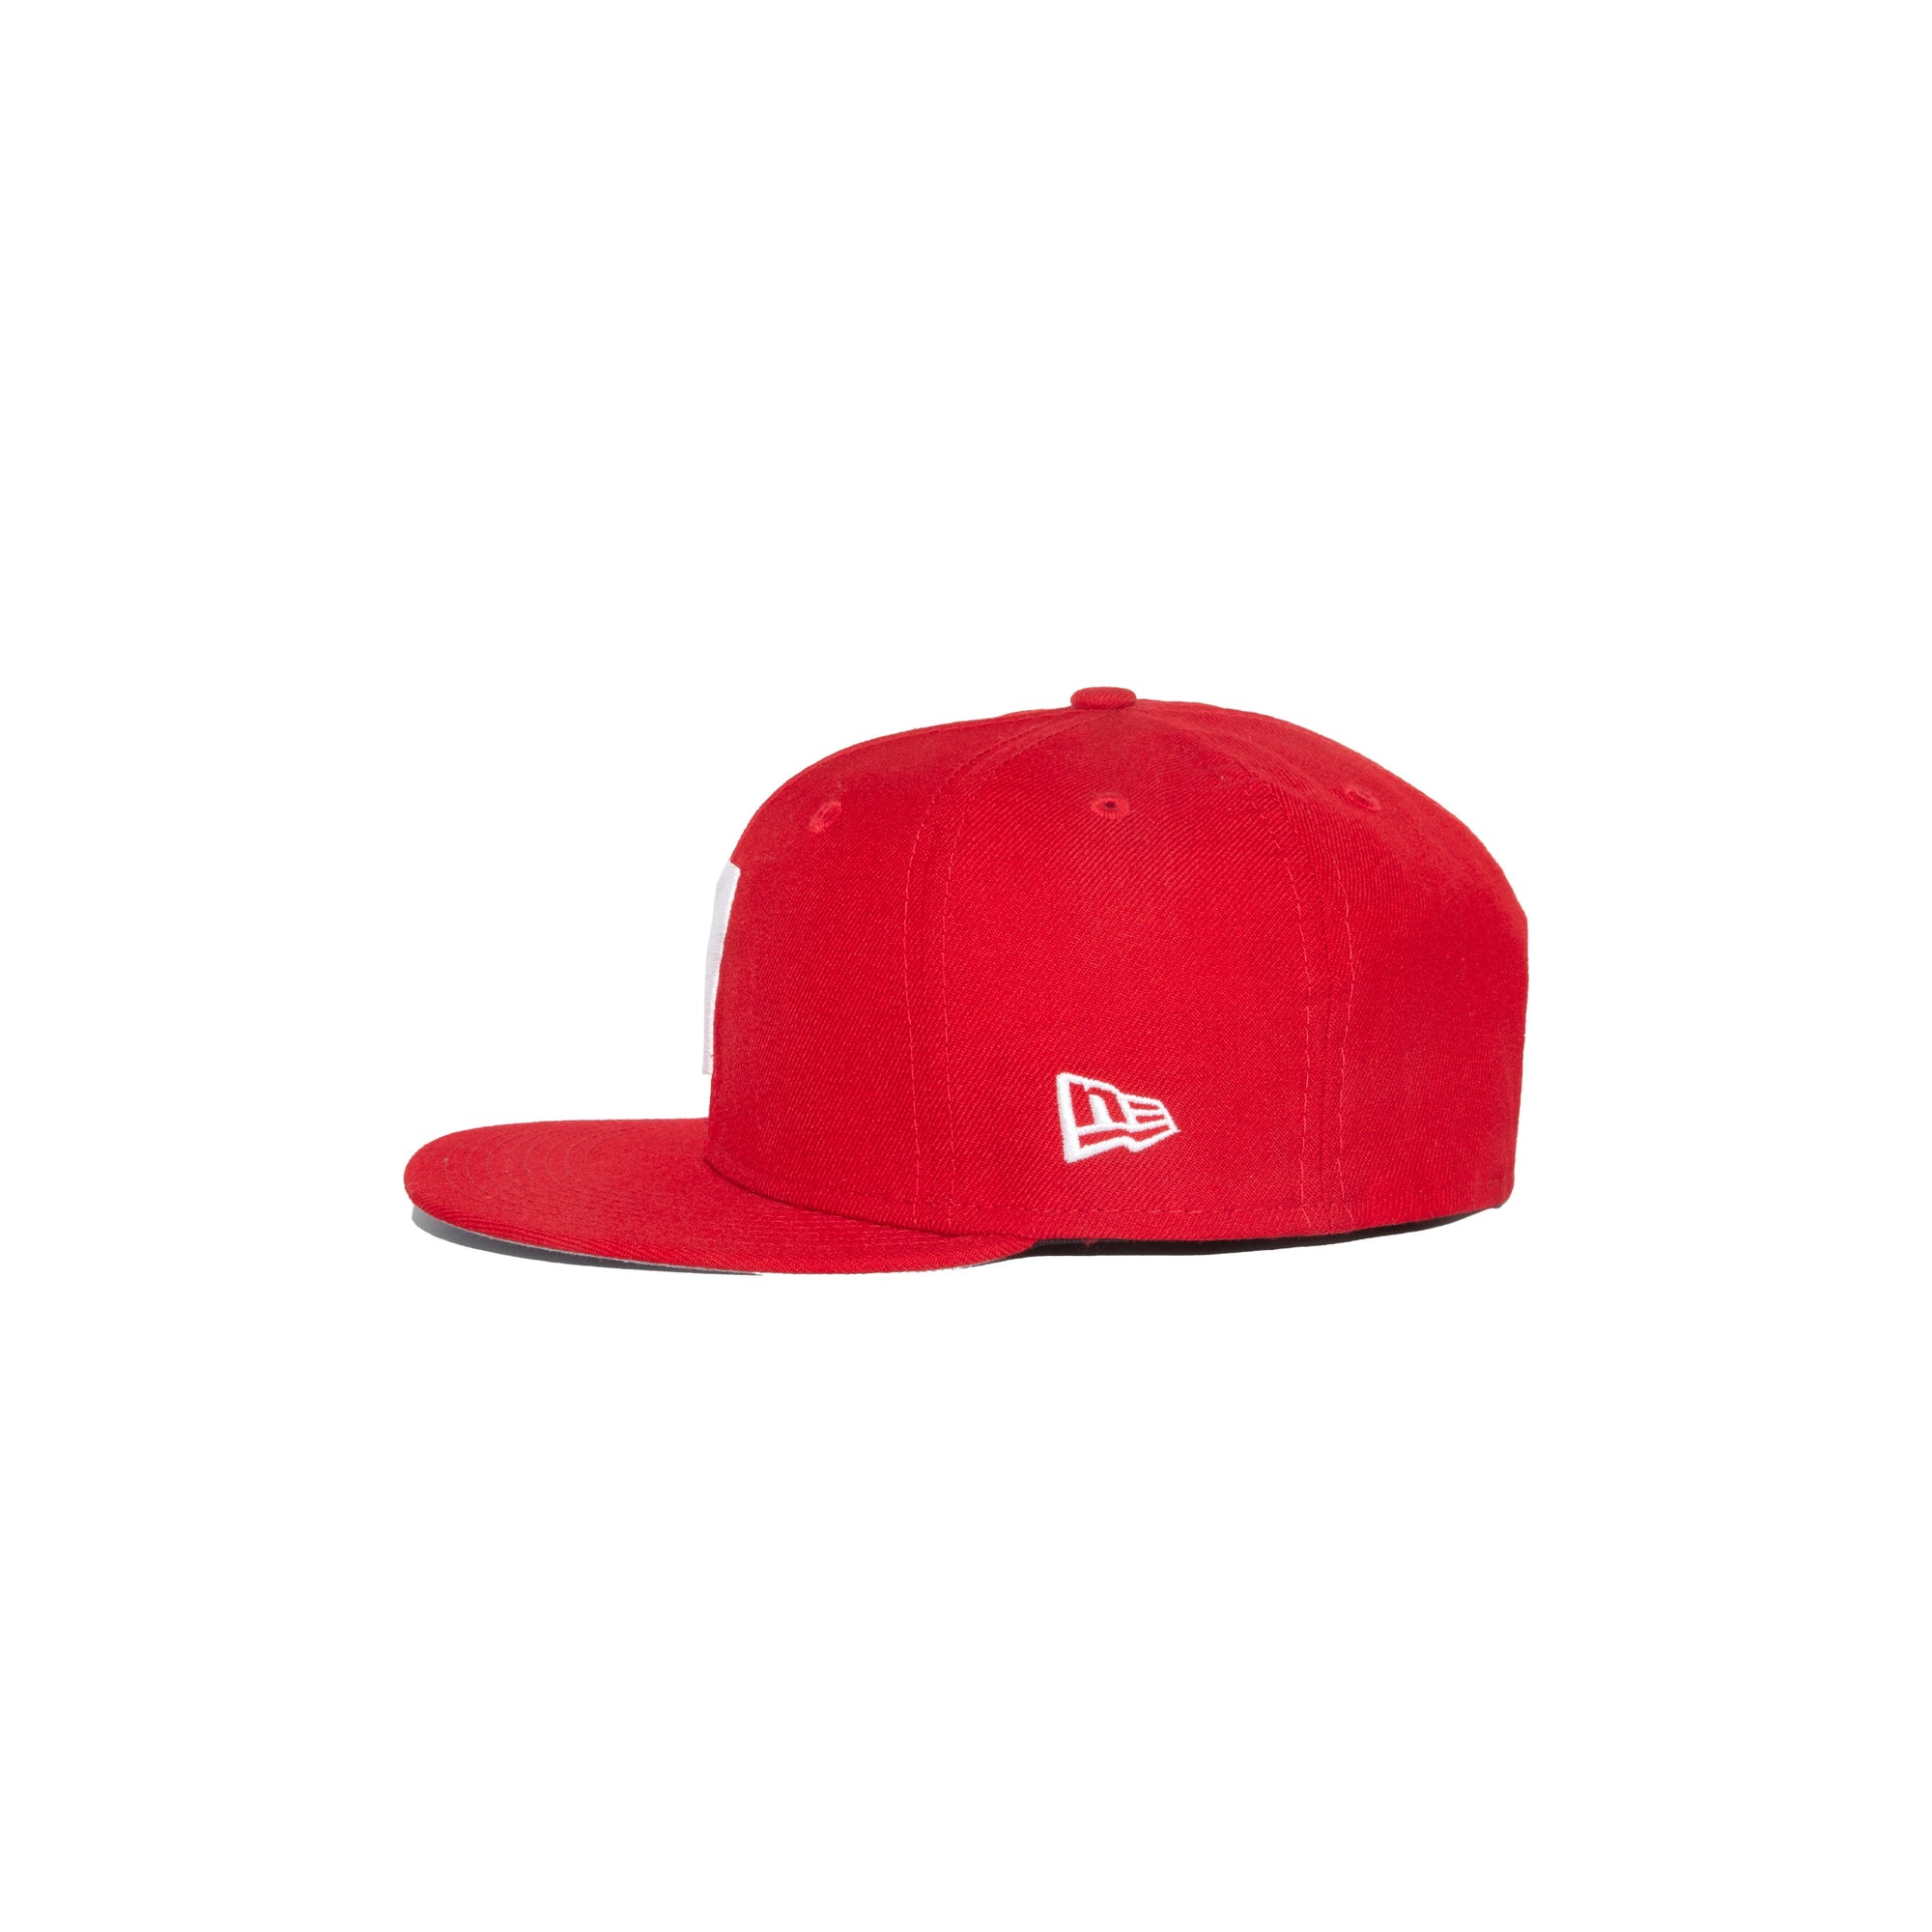 RED '7' FITTED